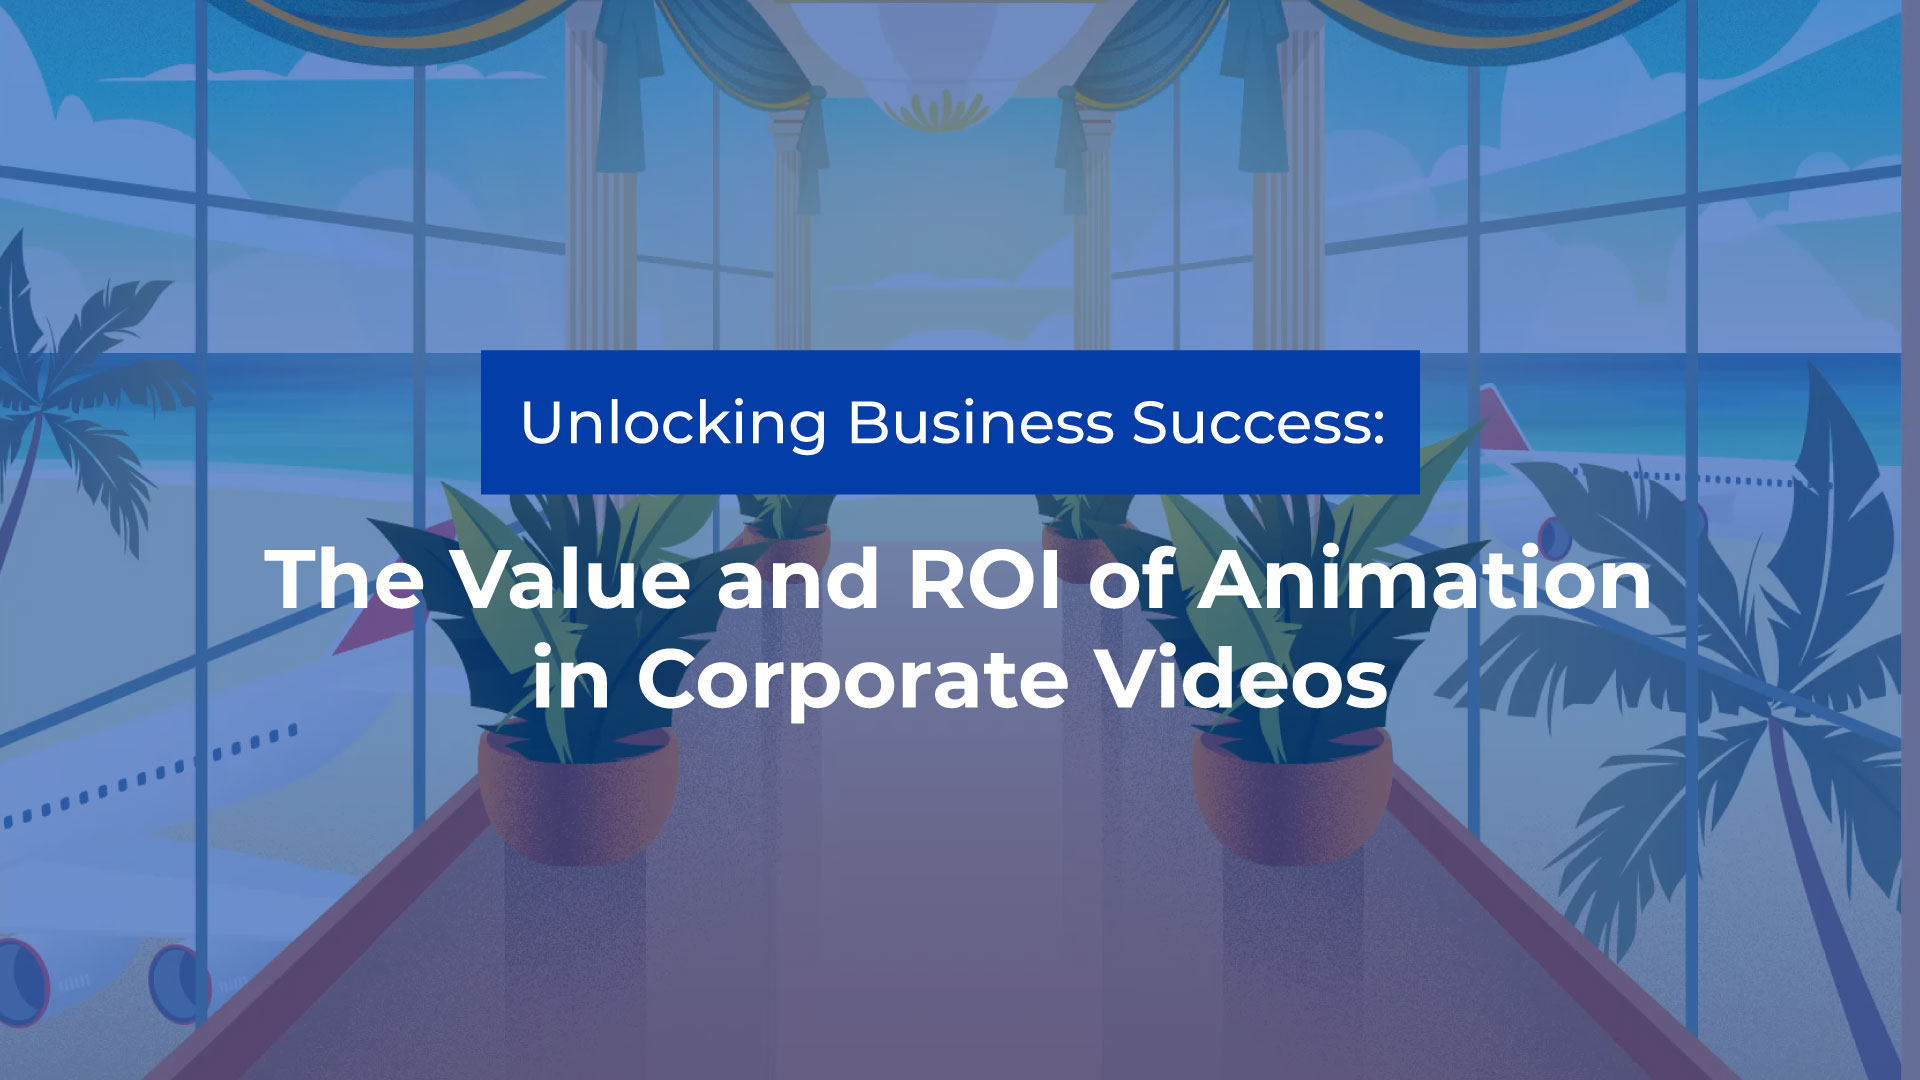 unlocking business success the value and ROI of animation corporate videos